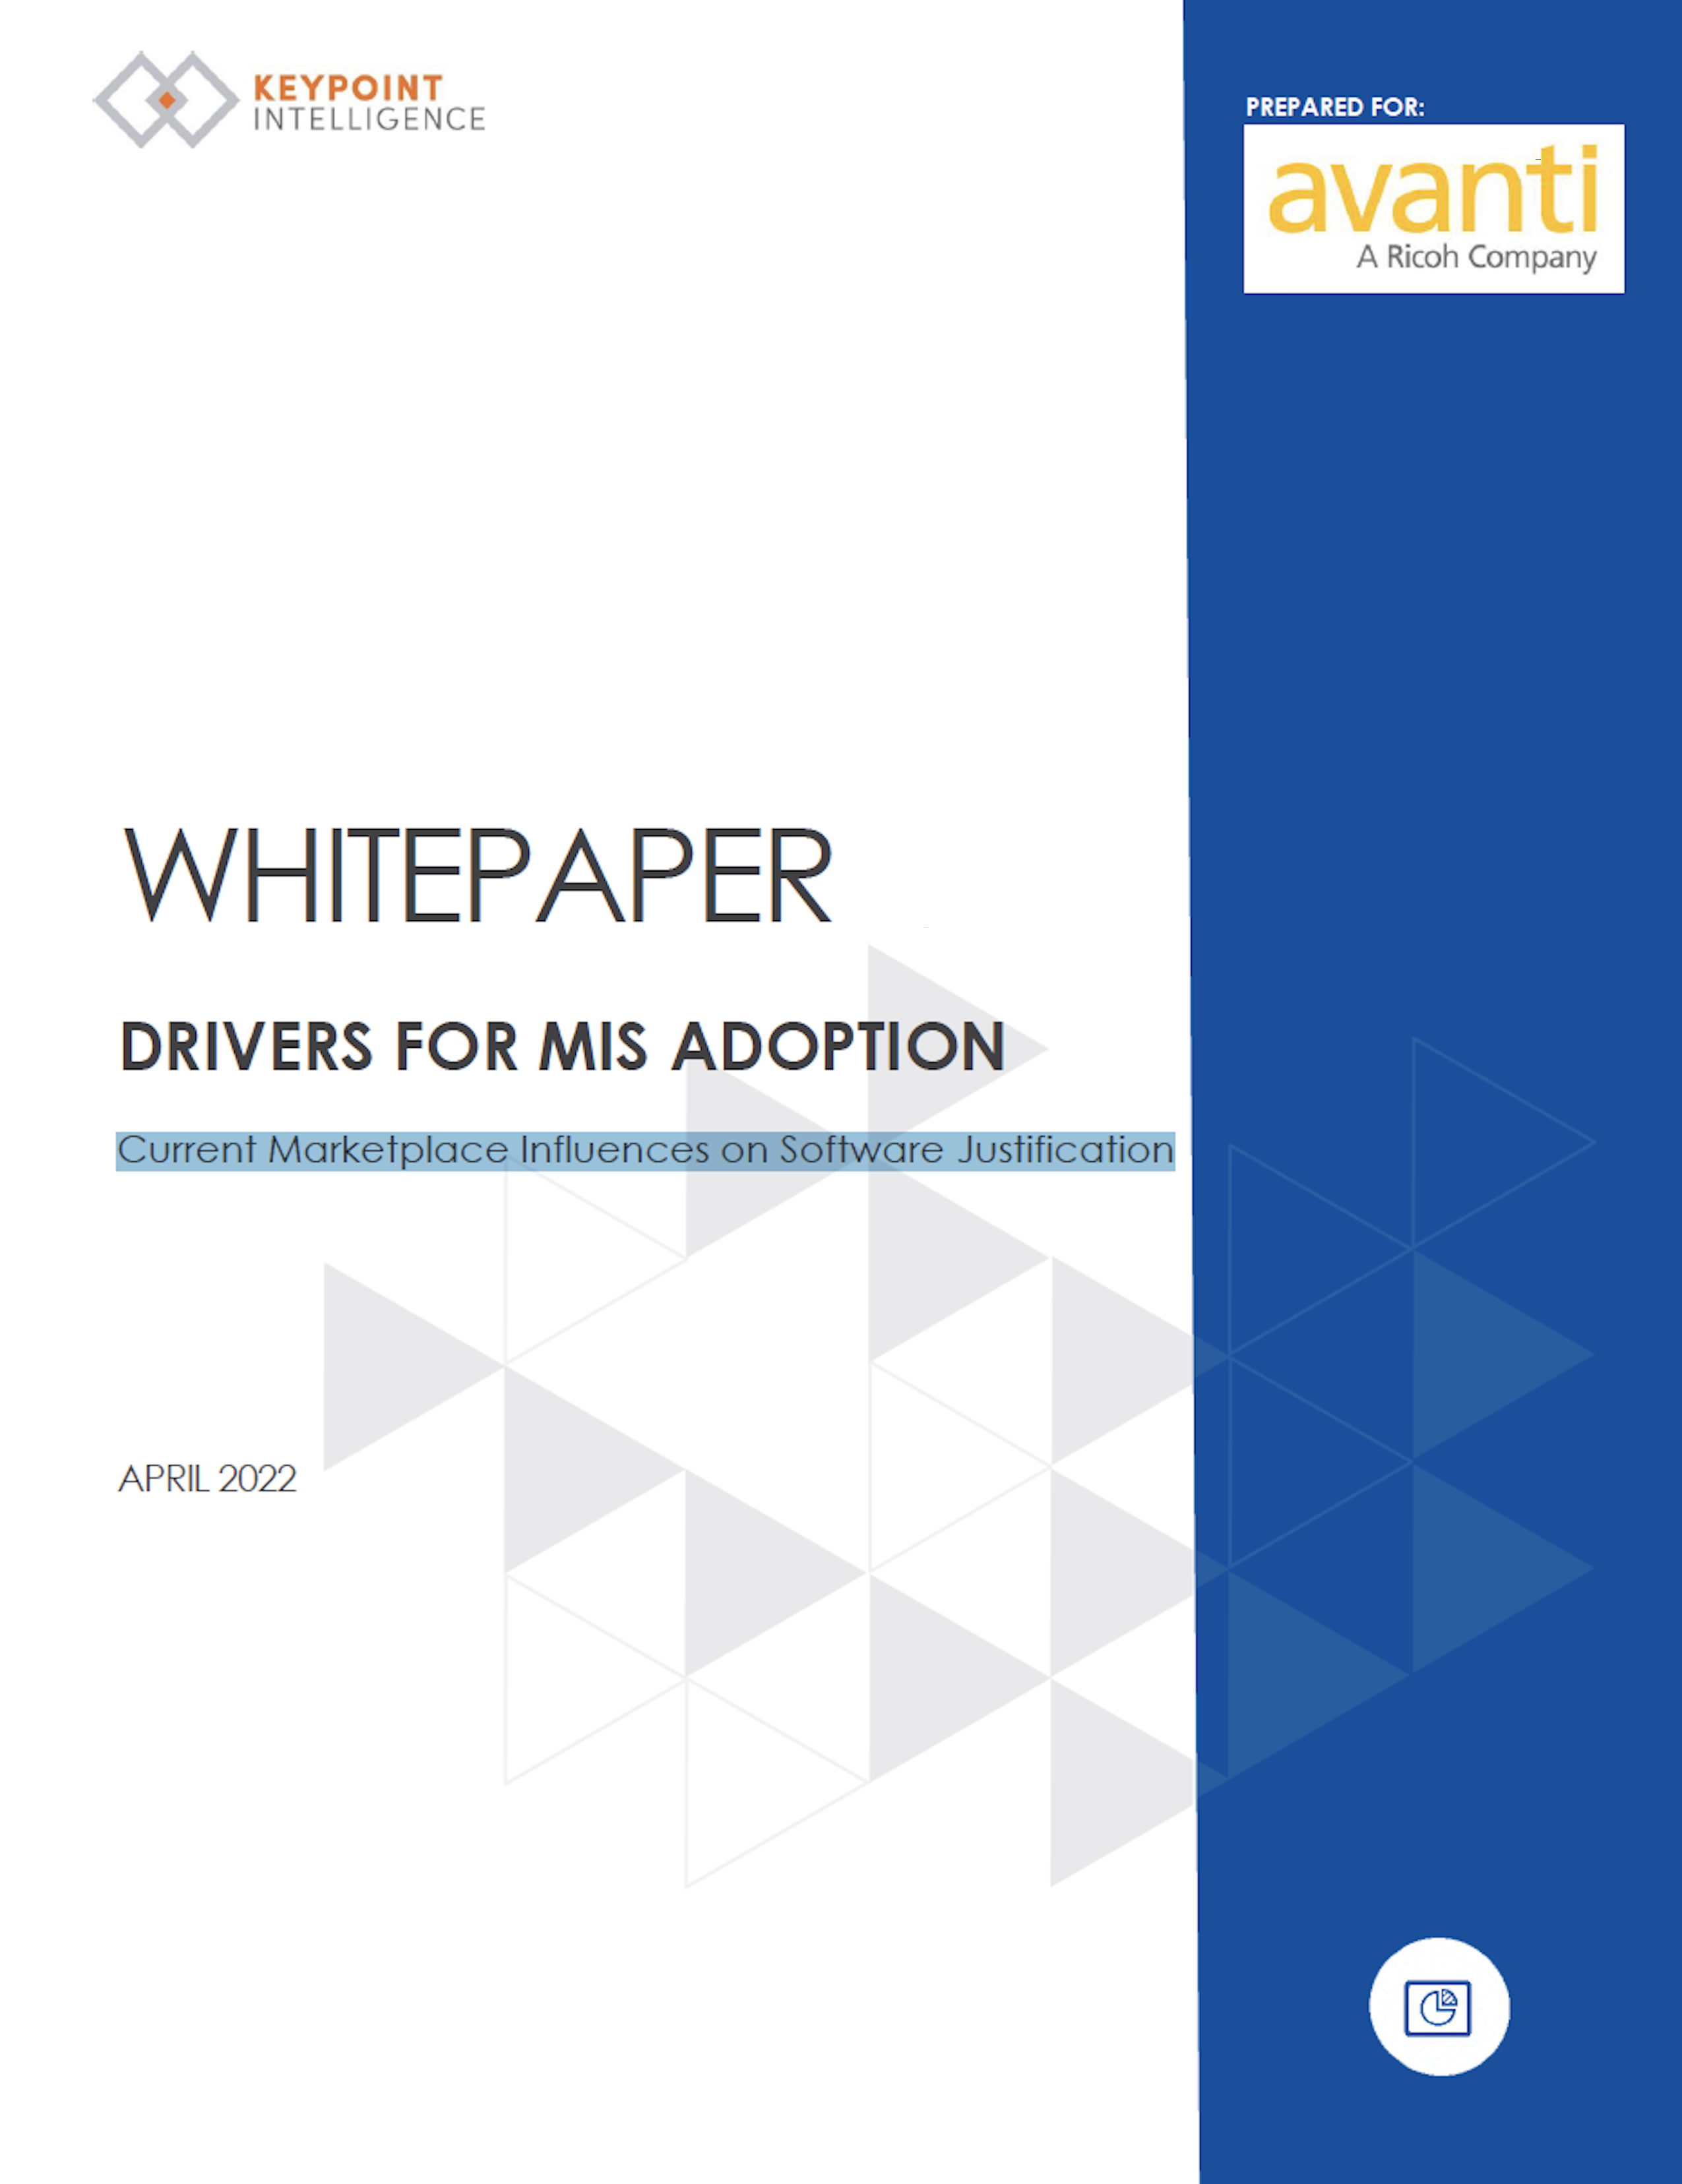 Drivers for MIS Adoption Whitepaper cover